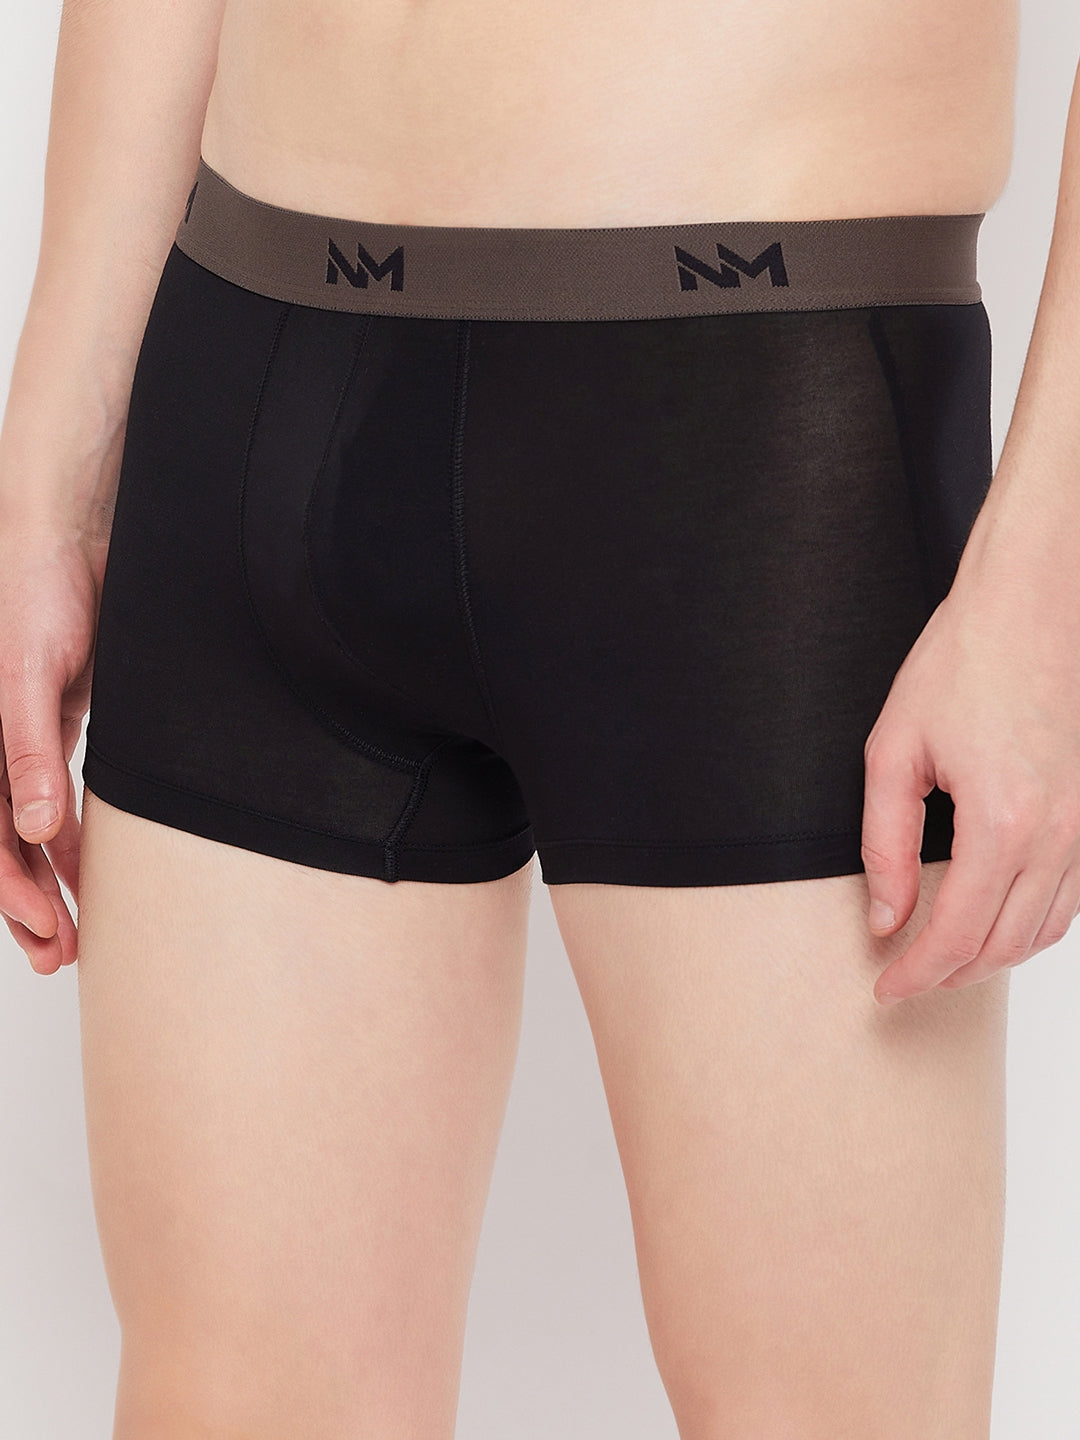 Neva Modal Solid Ultra Short Trunk Underwear for Men- Olive, Maroon, Black Collection (Pack of 3)